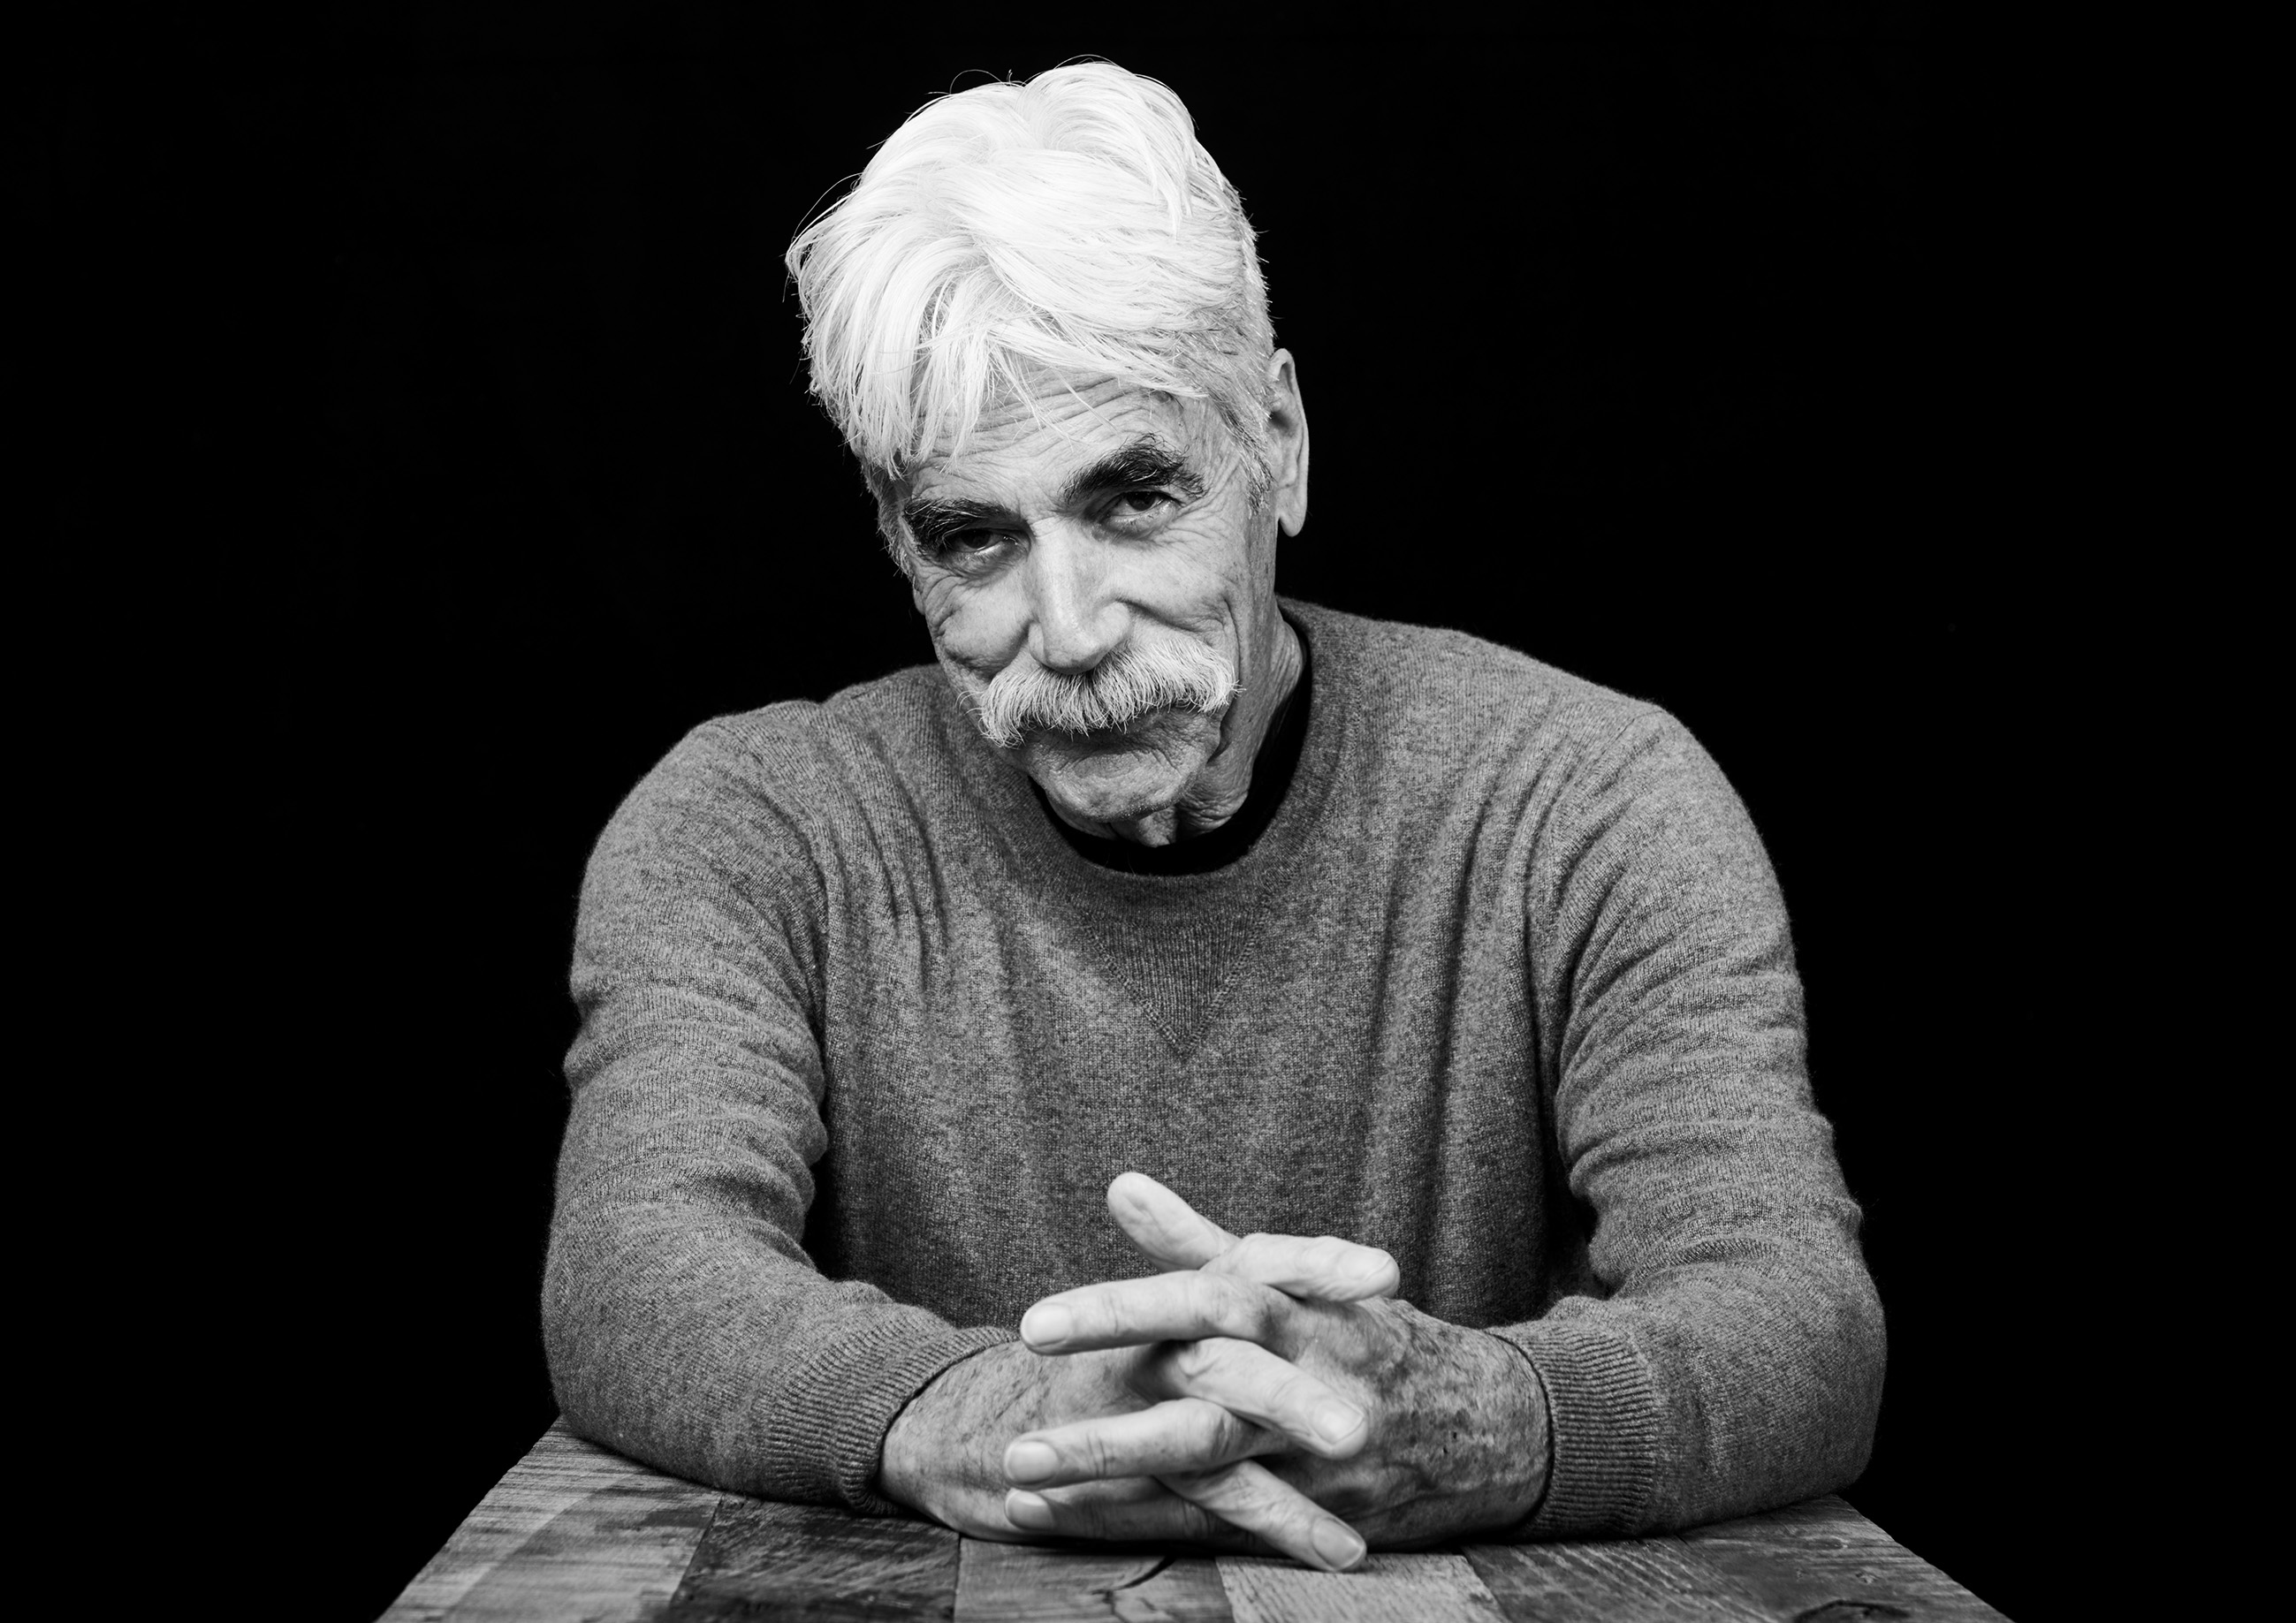 Academy Award-nominated actor Sam Elliott will share the remarkable story of 98-year-old WWII veteran Ray Lambert, a highly-decorated combat medic who landed in the first wave on Omaha Beach during the 2019 broadcast of PBS’ NATIONAL MEMORIAL DAY CONCERT. Credit: Deadline/REX/Shutterstock